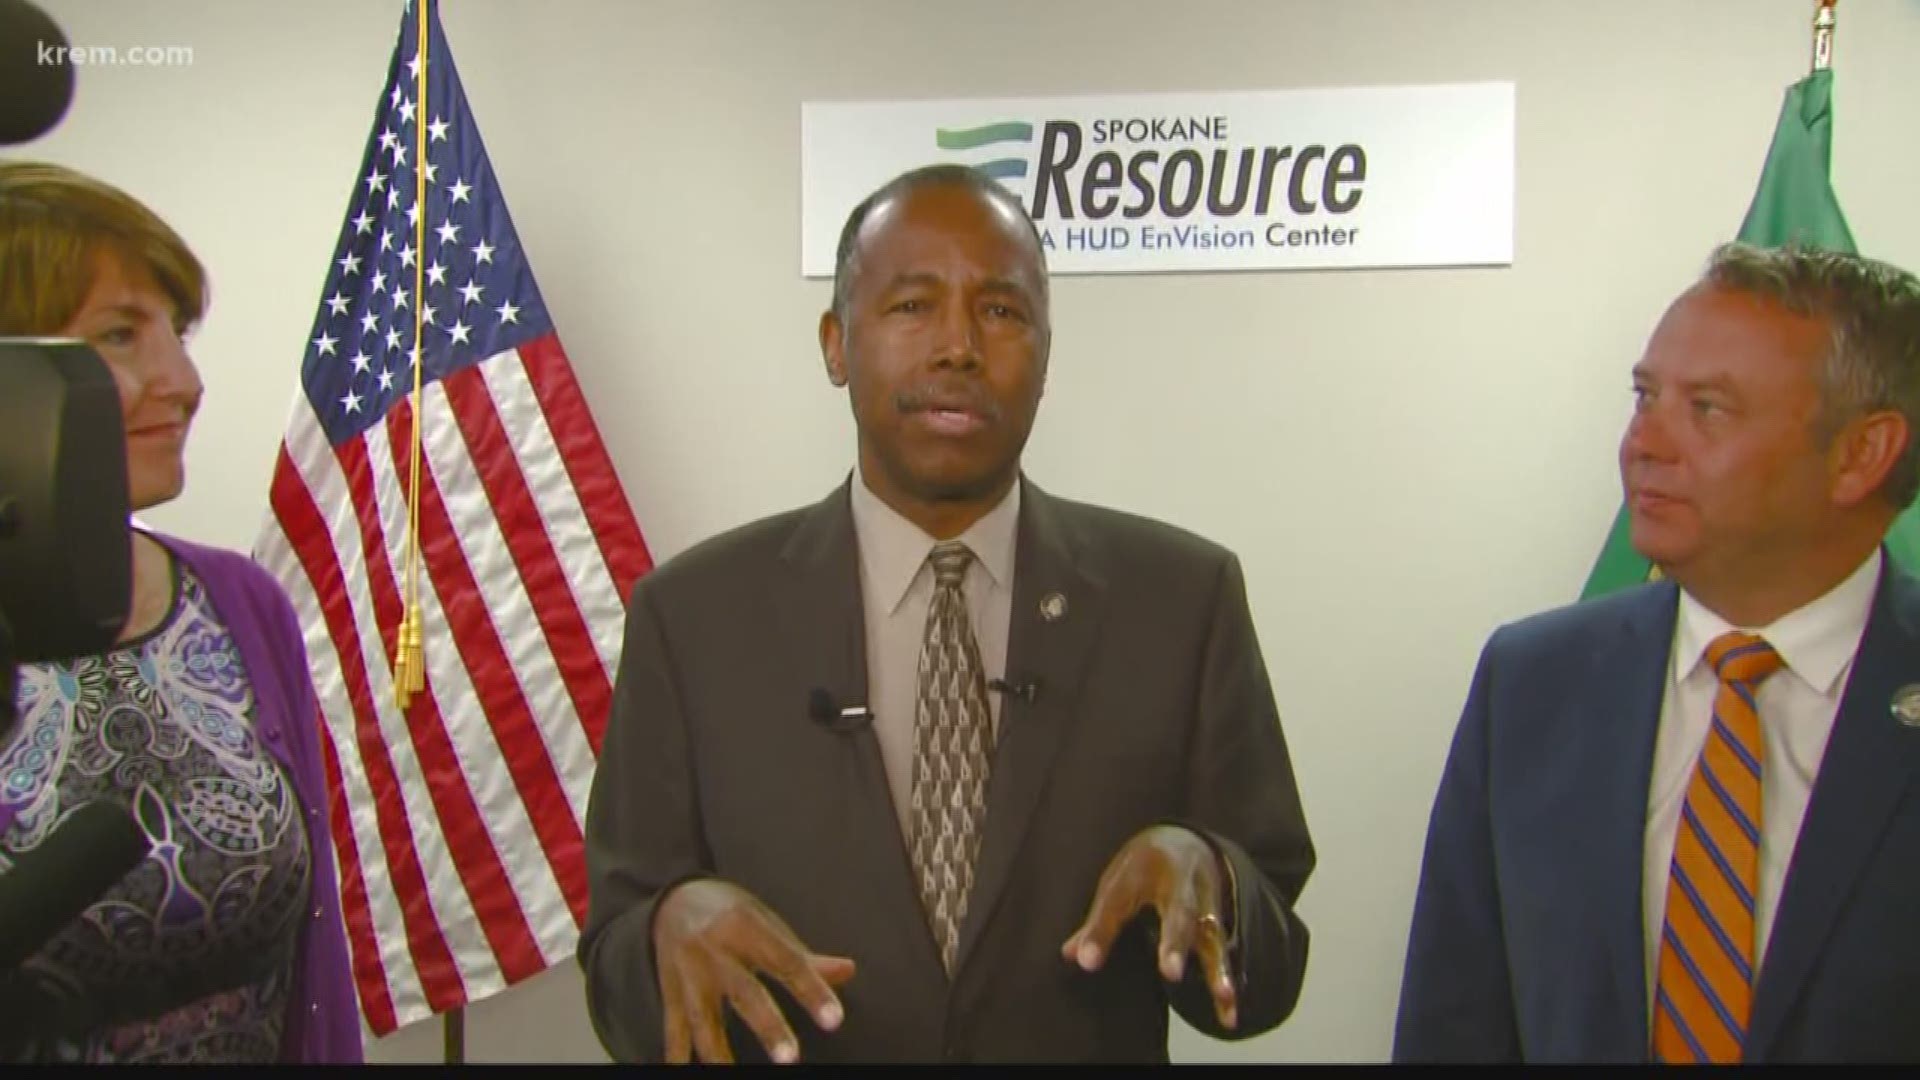 KREM's Taylor Viydo went to the EnVision Center in Spokane on Tuesday, where HUD Secretary Ben Carson was touring and speaking with residents about homelessness.